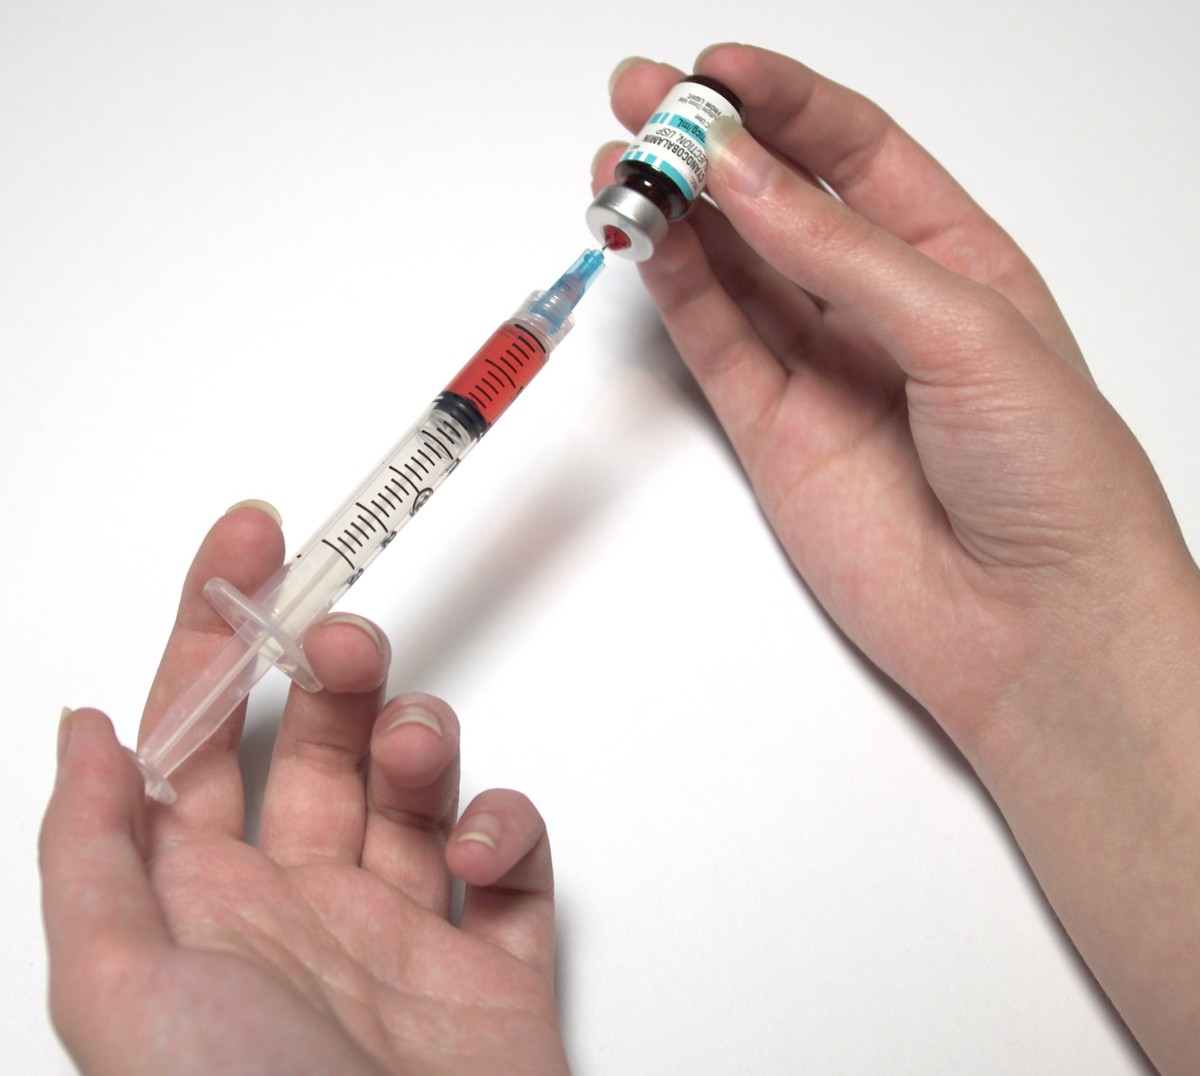 A 3 mL syringe is typically used for reconstituting and administering vaccines.